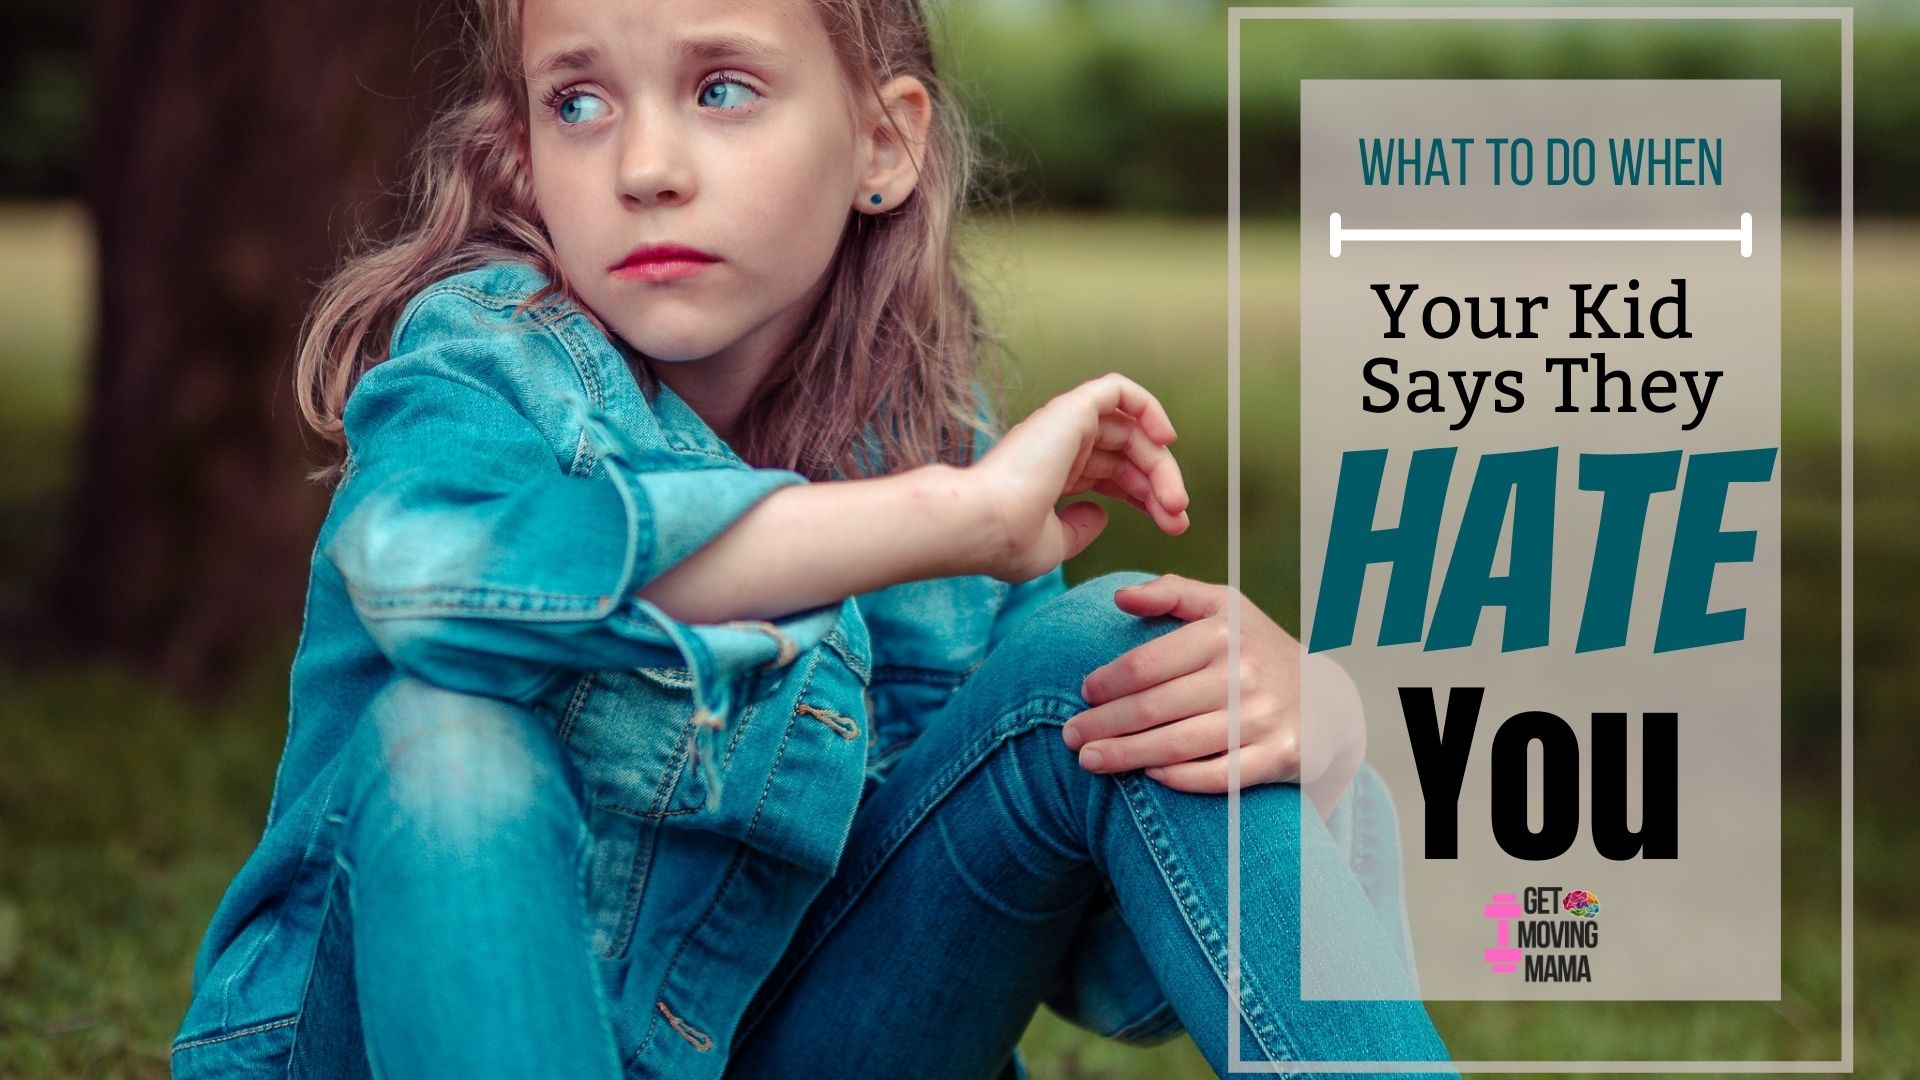 A picture of a girl who looks sullen with "what to do when your kid says they hate you" in overlay text.